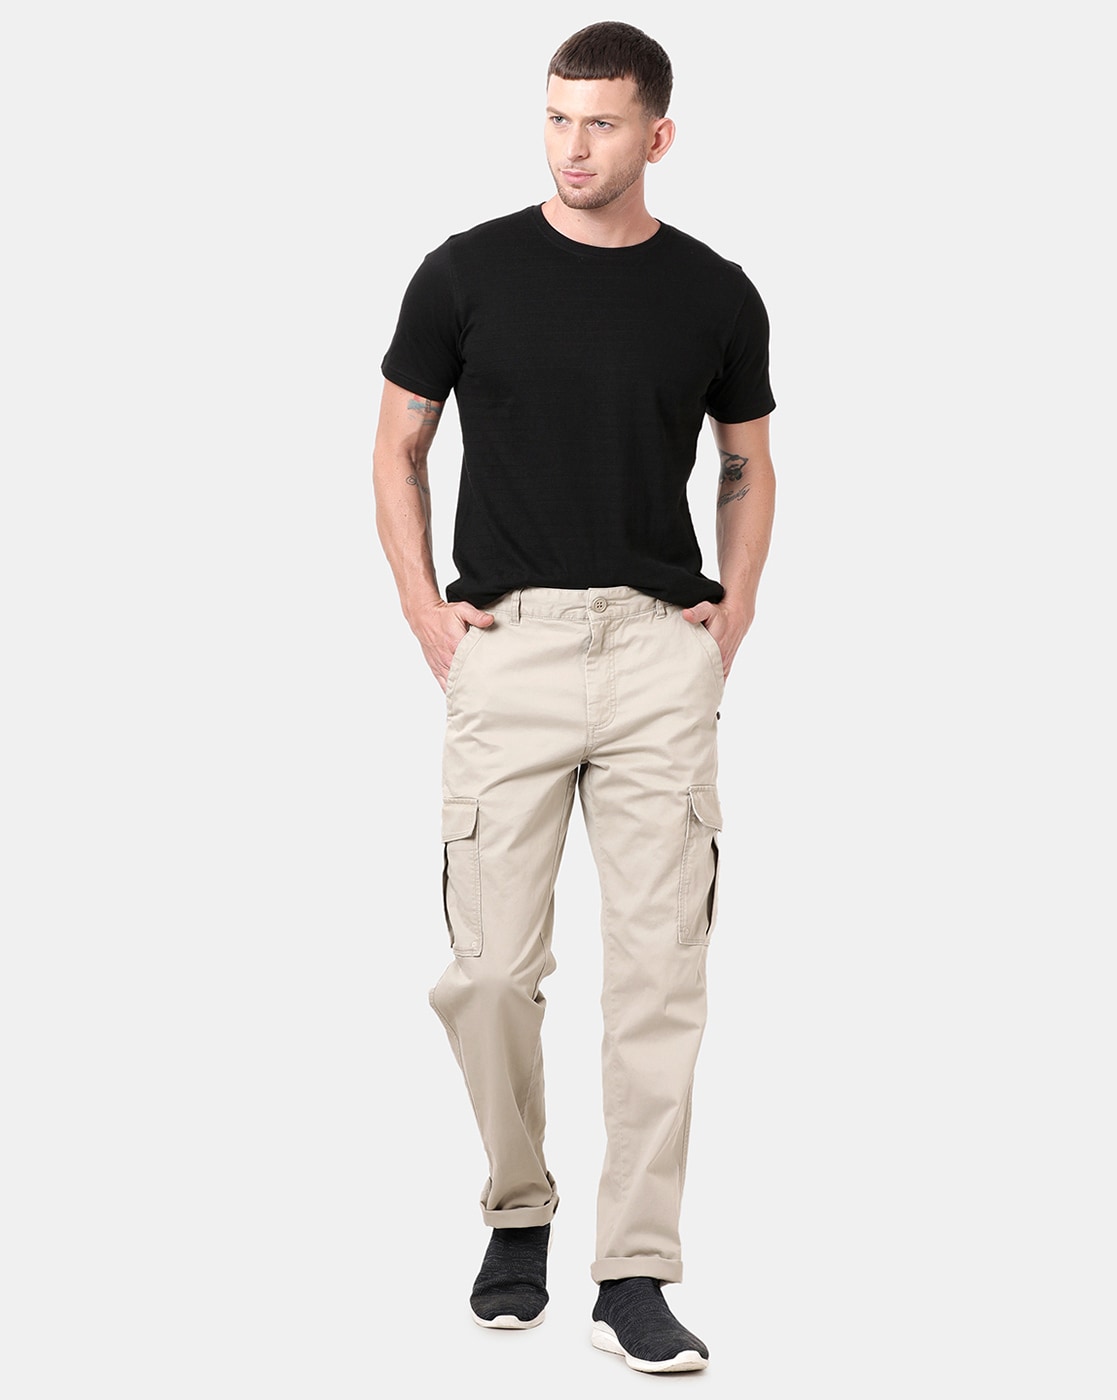 Buy Vertical Stylish and Trendy Cargo Pants for Men and Boys DSJD86Y68K  28 Brown at Amazonin